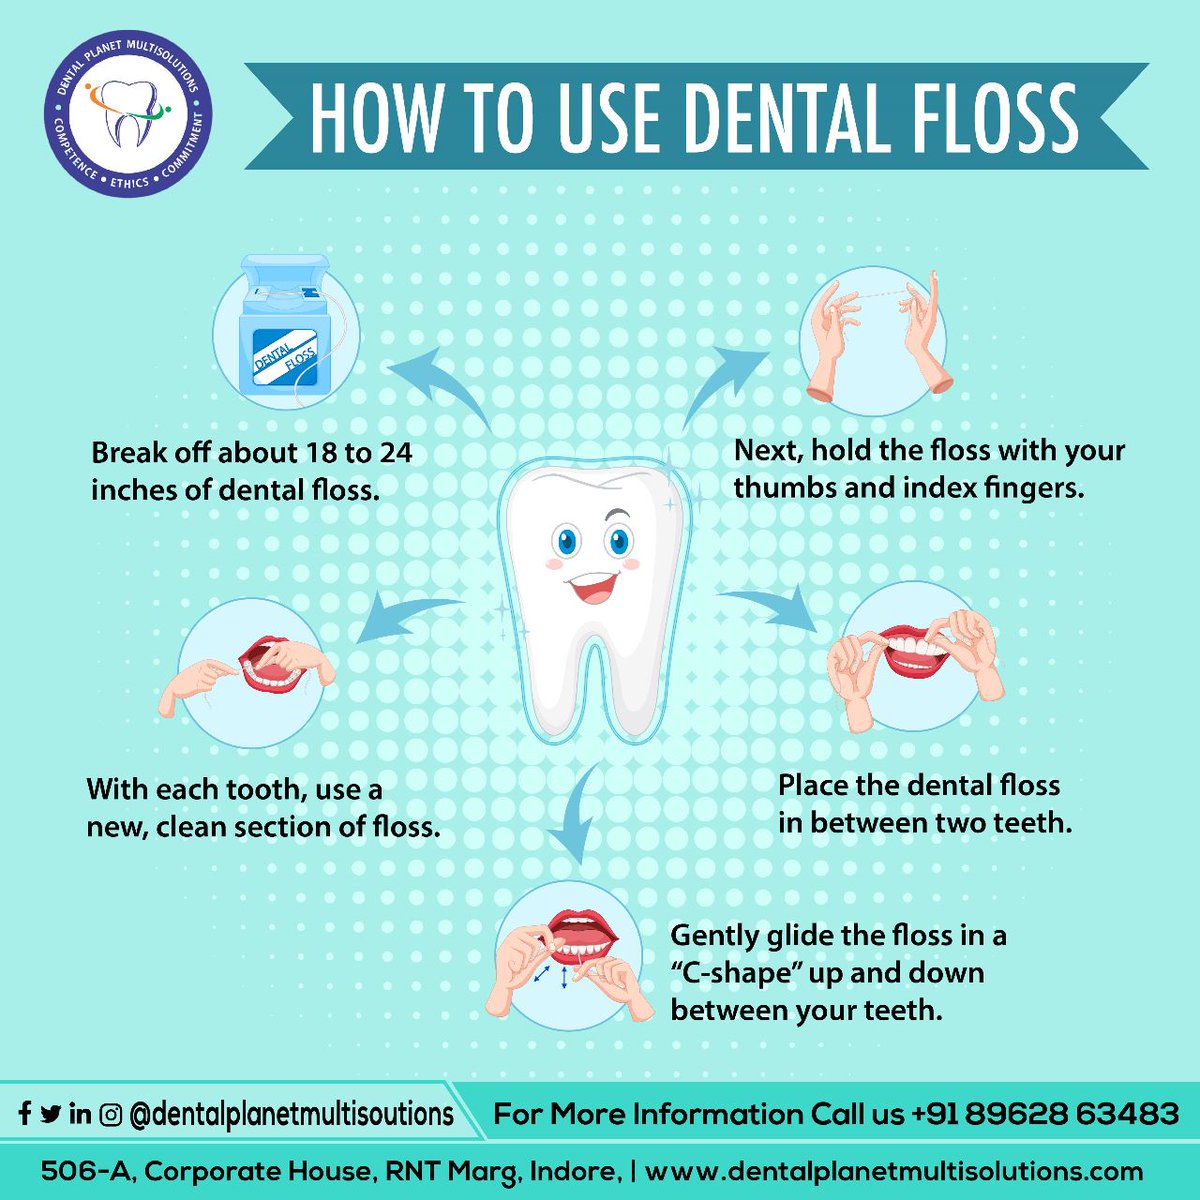 Flossing is an essential part of maintaining good oral hygiene.
Here's how to use dental floss properly. Remember to floss at least once a day for a healthy smile!
.
#flossingtips #DentalFlossHowTo #healthysmilehabits #flosslikeapro #oralhygiene101 #flossingisessential